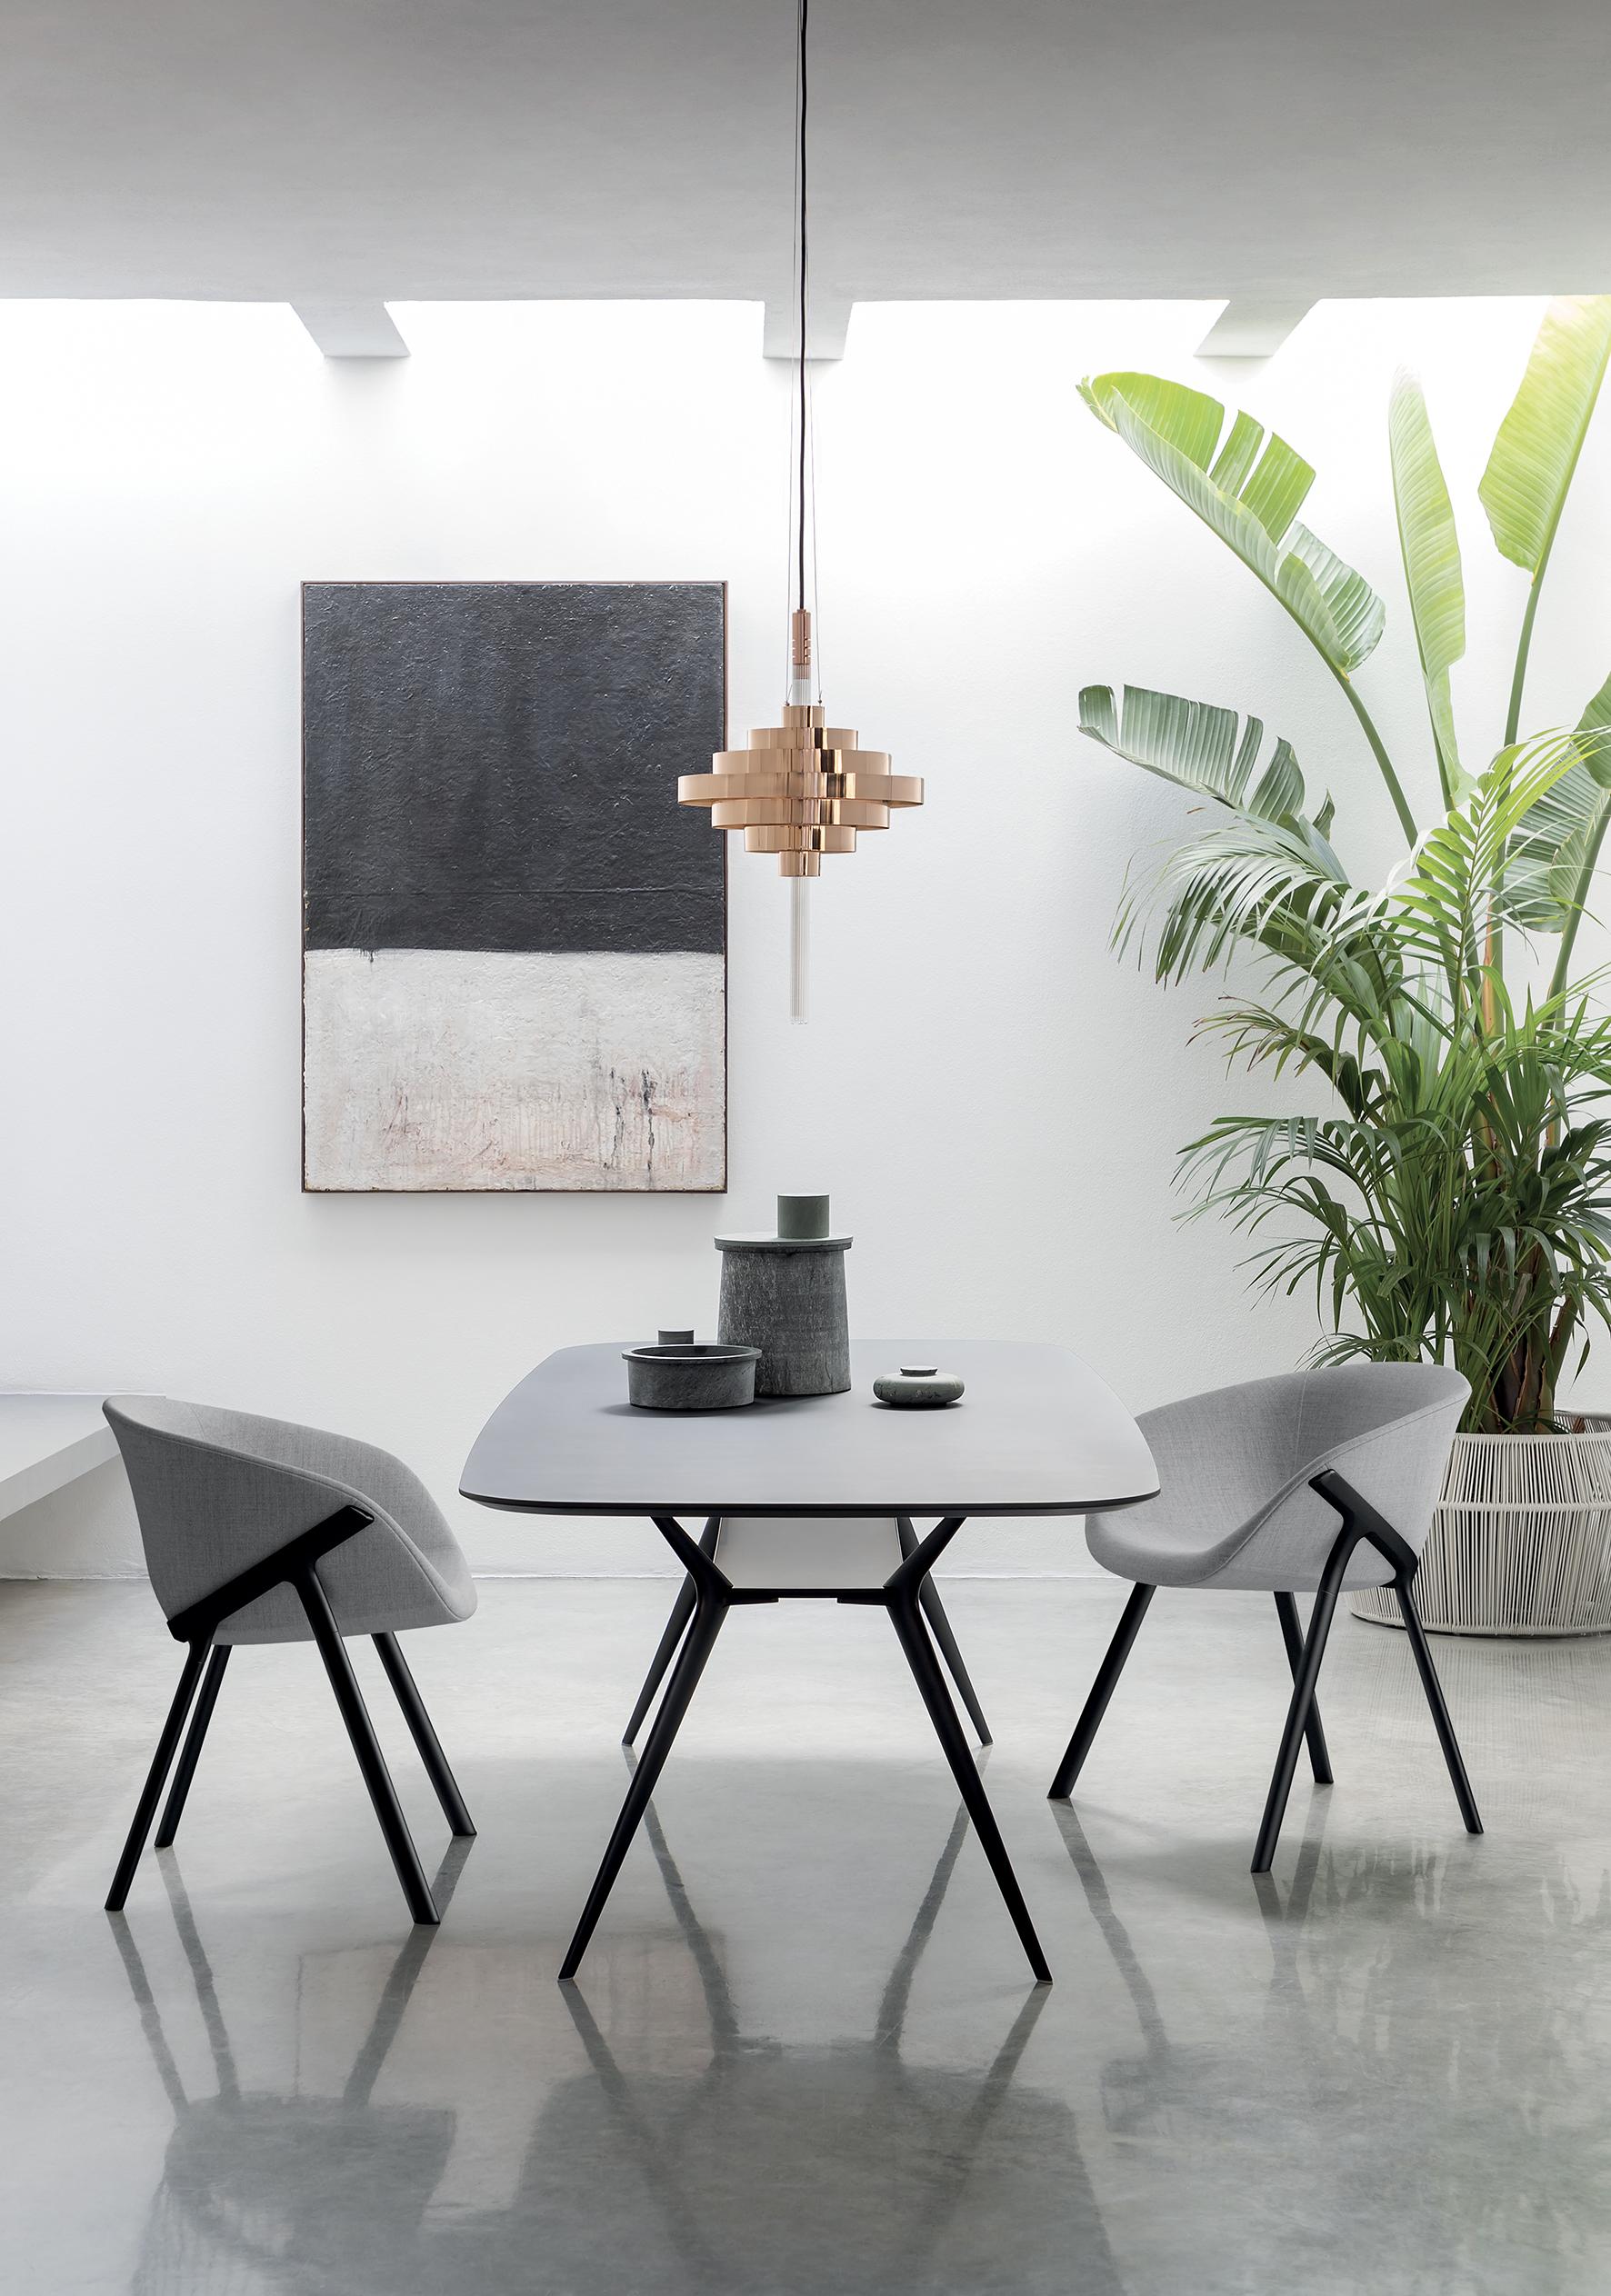 Alias Biplane 402 Table in Graphite Grey MDF Top and Lacquered Aluminium Frame by Alberto Meda

Round table with structure composed of 4 legs in die-cast aluminium with painted or polished finishes, connected by a shelf.
Top available in: -